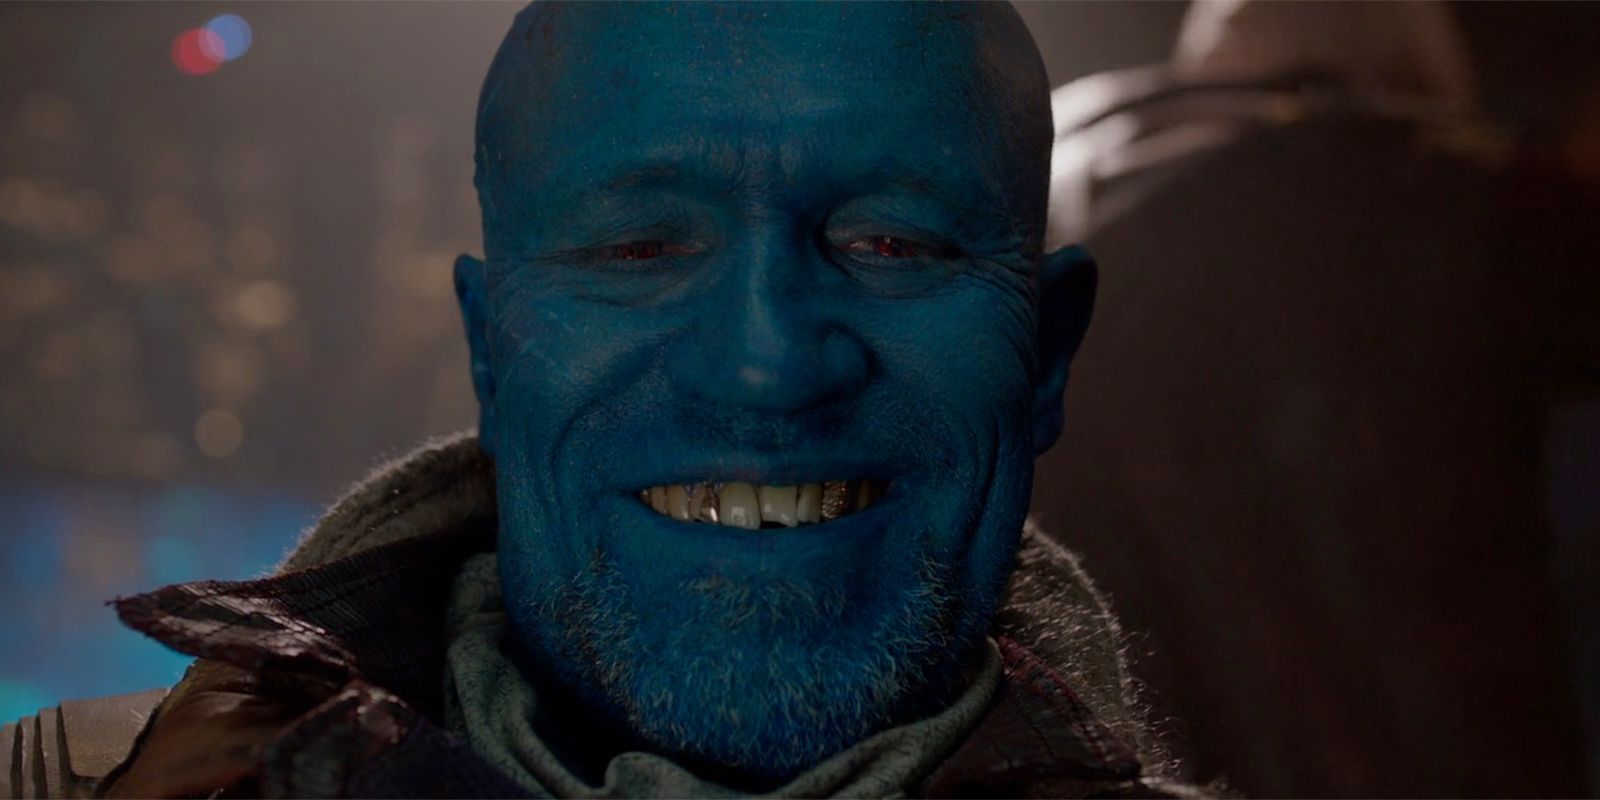 Yondu laughing in Guardians Of The Galaxy when he finds a Troll doll in the Orb.